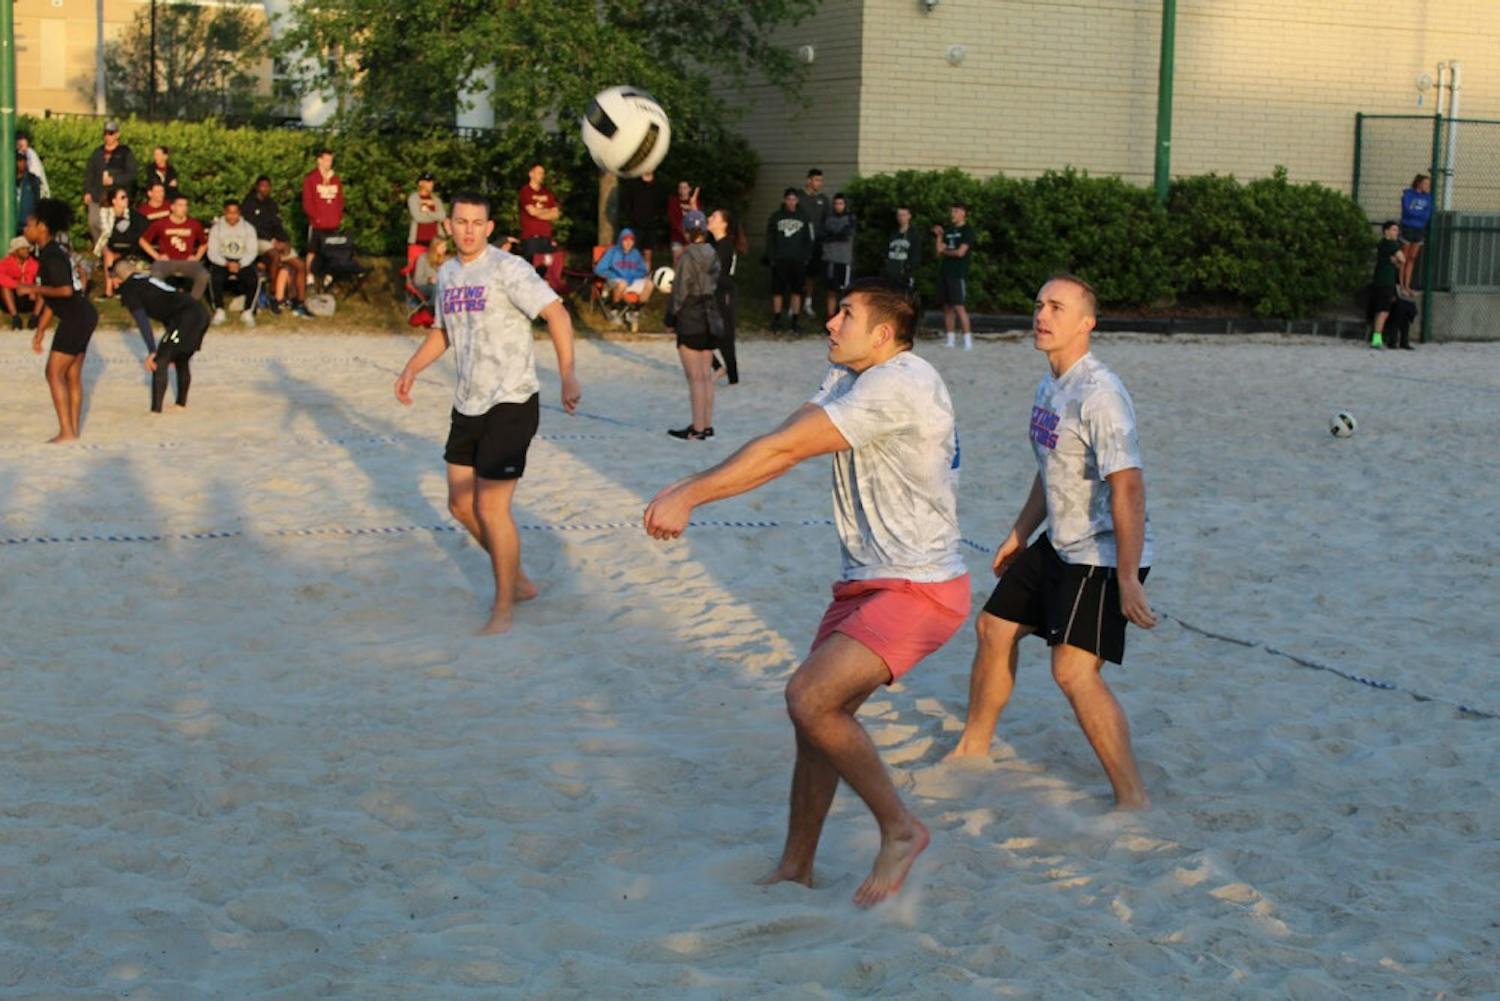 Air Force ROTC cadets from UF play beach volleyball at an annual competition called Lime Cup, which was held at University of Central Florida this year.